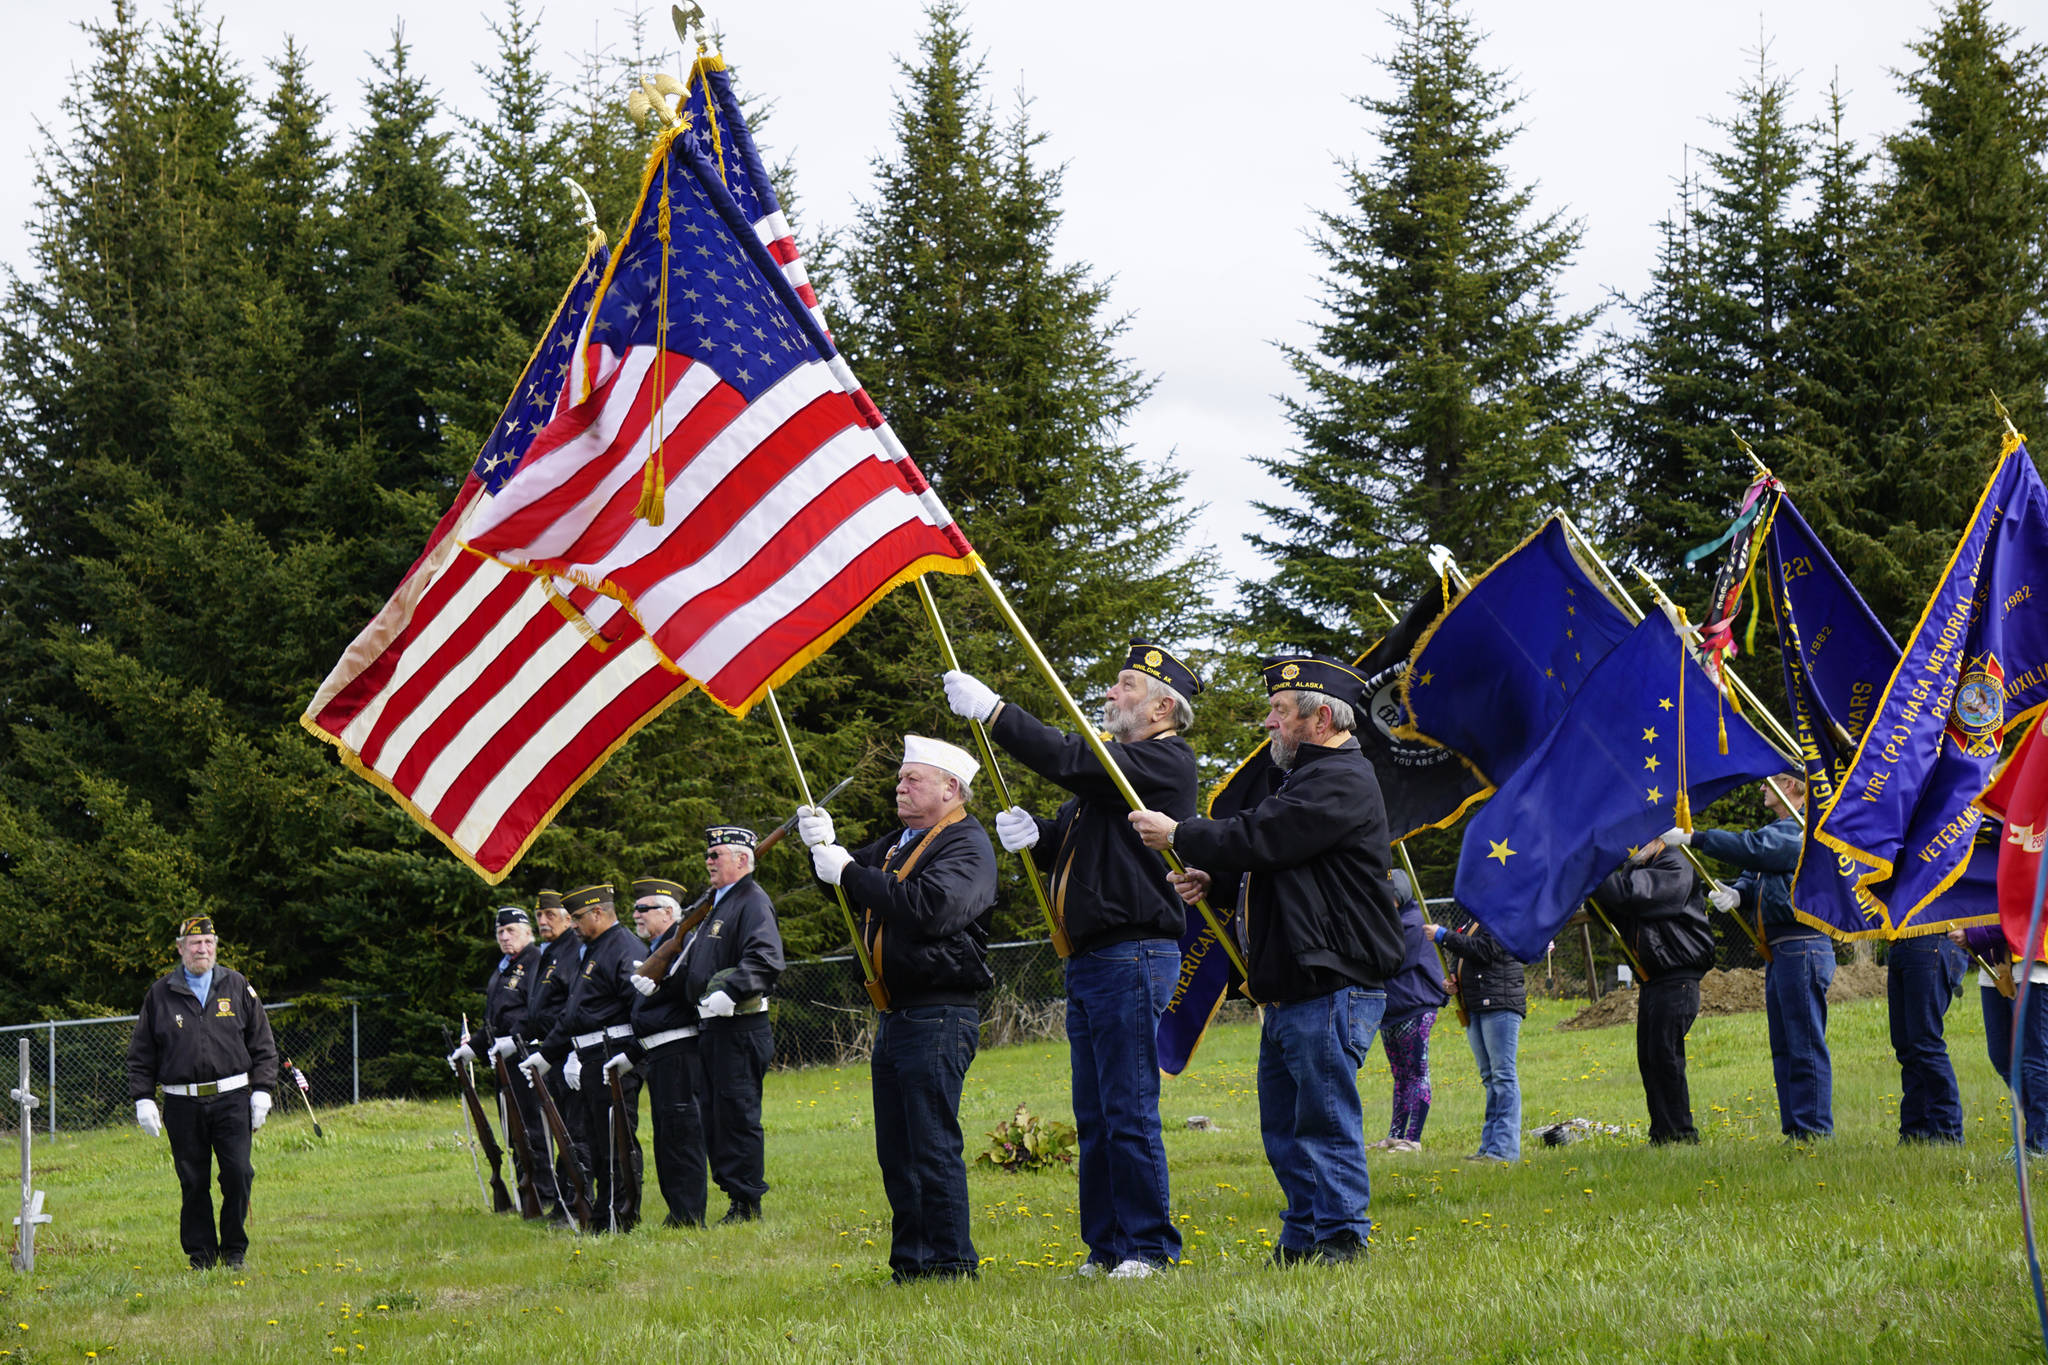 Members of the Veterans of Foreign Wars, the American Legion, Homer and Ninilchik posts, the American Legion Auxiliary and the Sons of the American Legion hold an honor guard at Memorial Day ceremonies on Monday, May 27, 2019, at Hickerson Memorial Cemetery in Homer, Alaska. About 75 people braved a blustery wind to attend the ceremonies. (Photo by Michael Armstrong/Homer News)